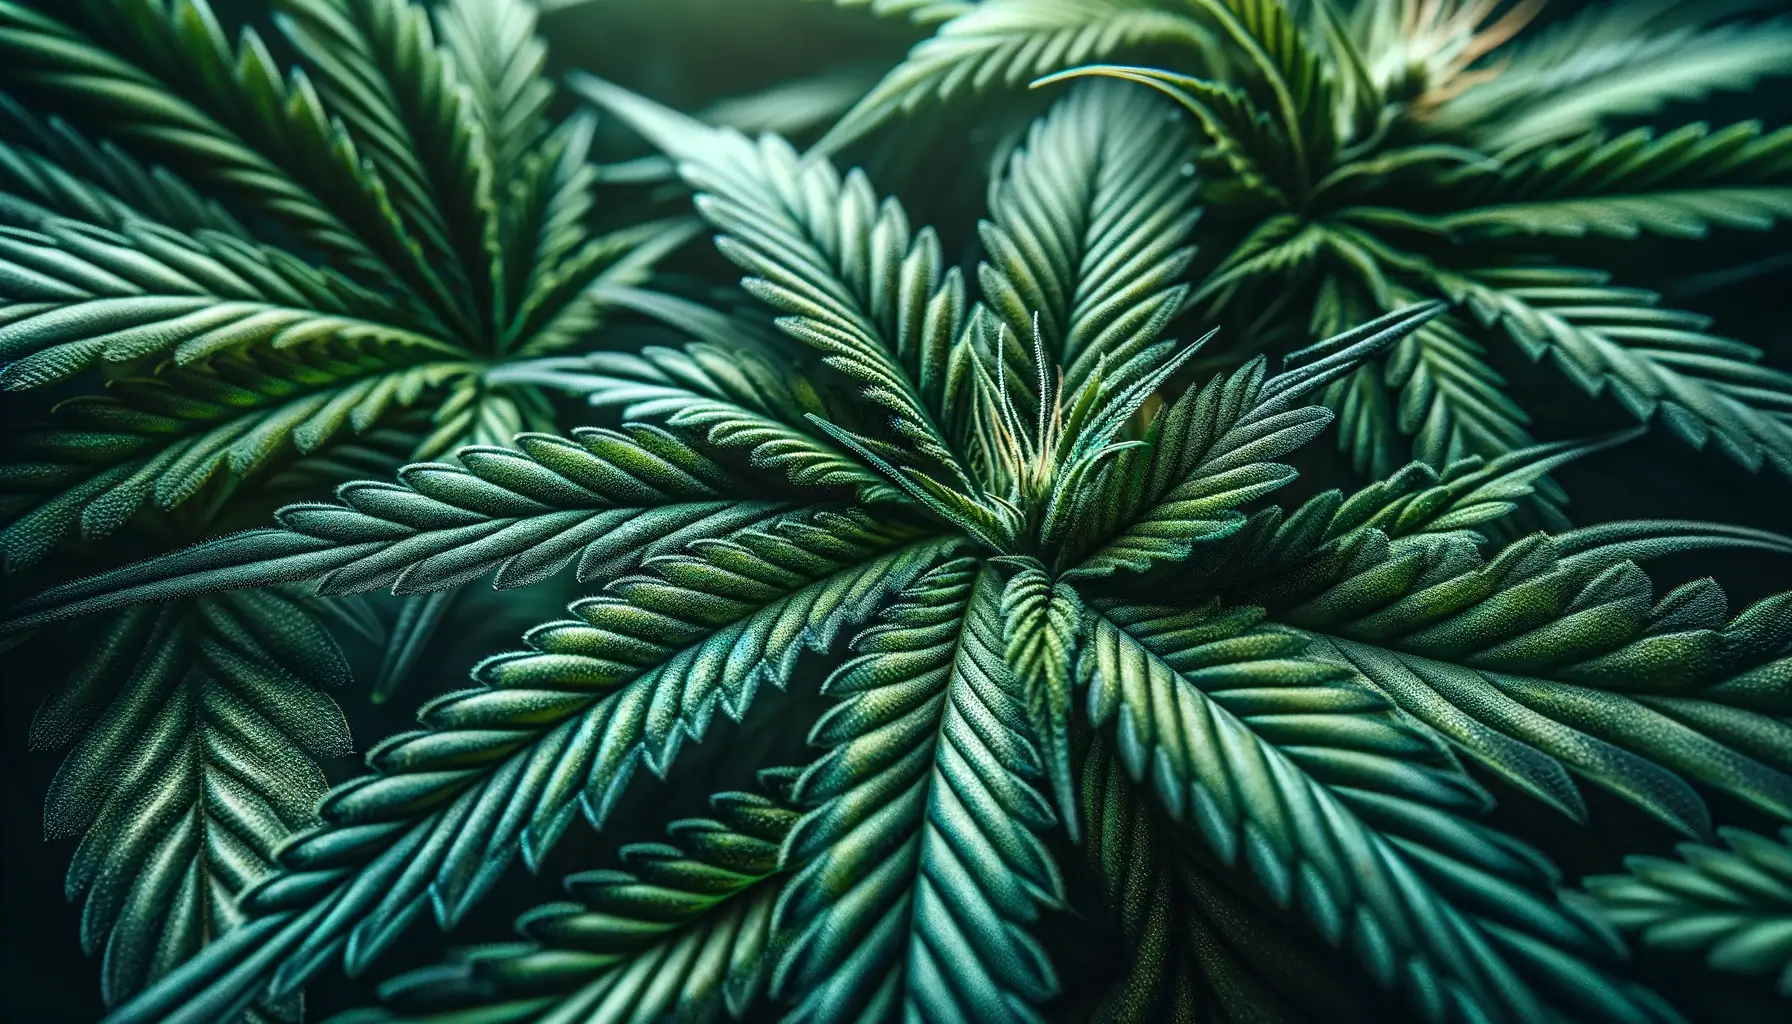 close up of vibrant cannabis leaves showcasing the intricate textures and natural green hues from a weed store in port credit mississauga on lakeshore road.